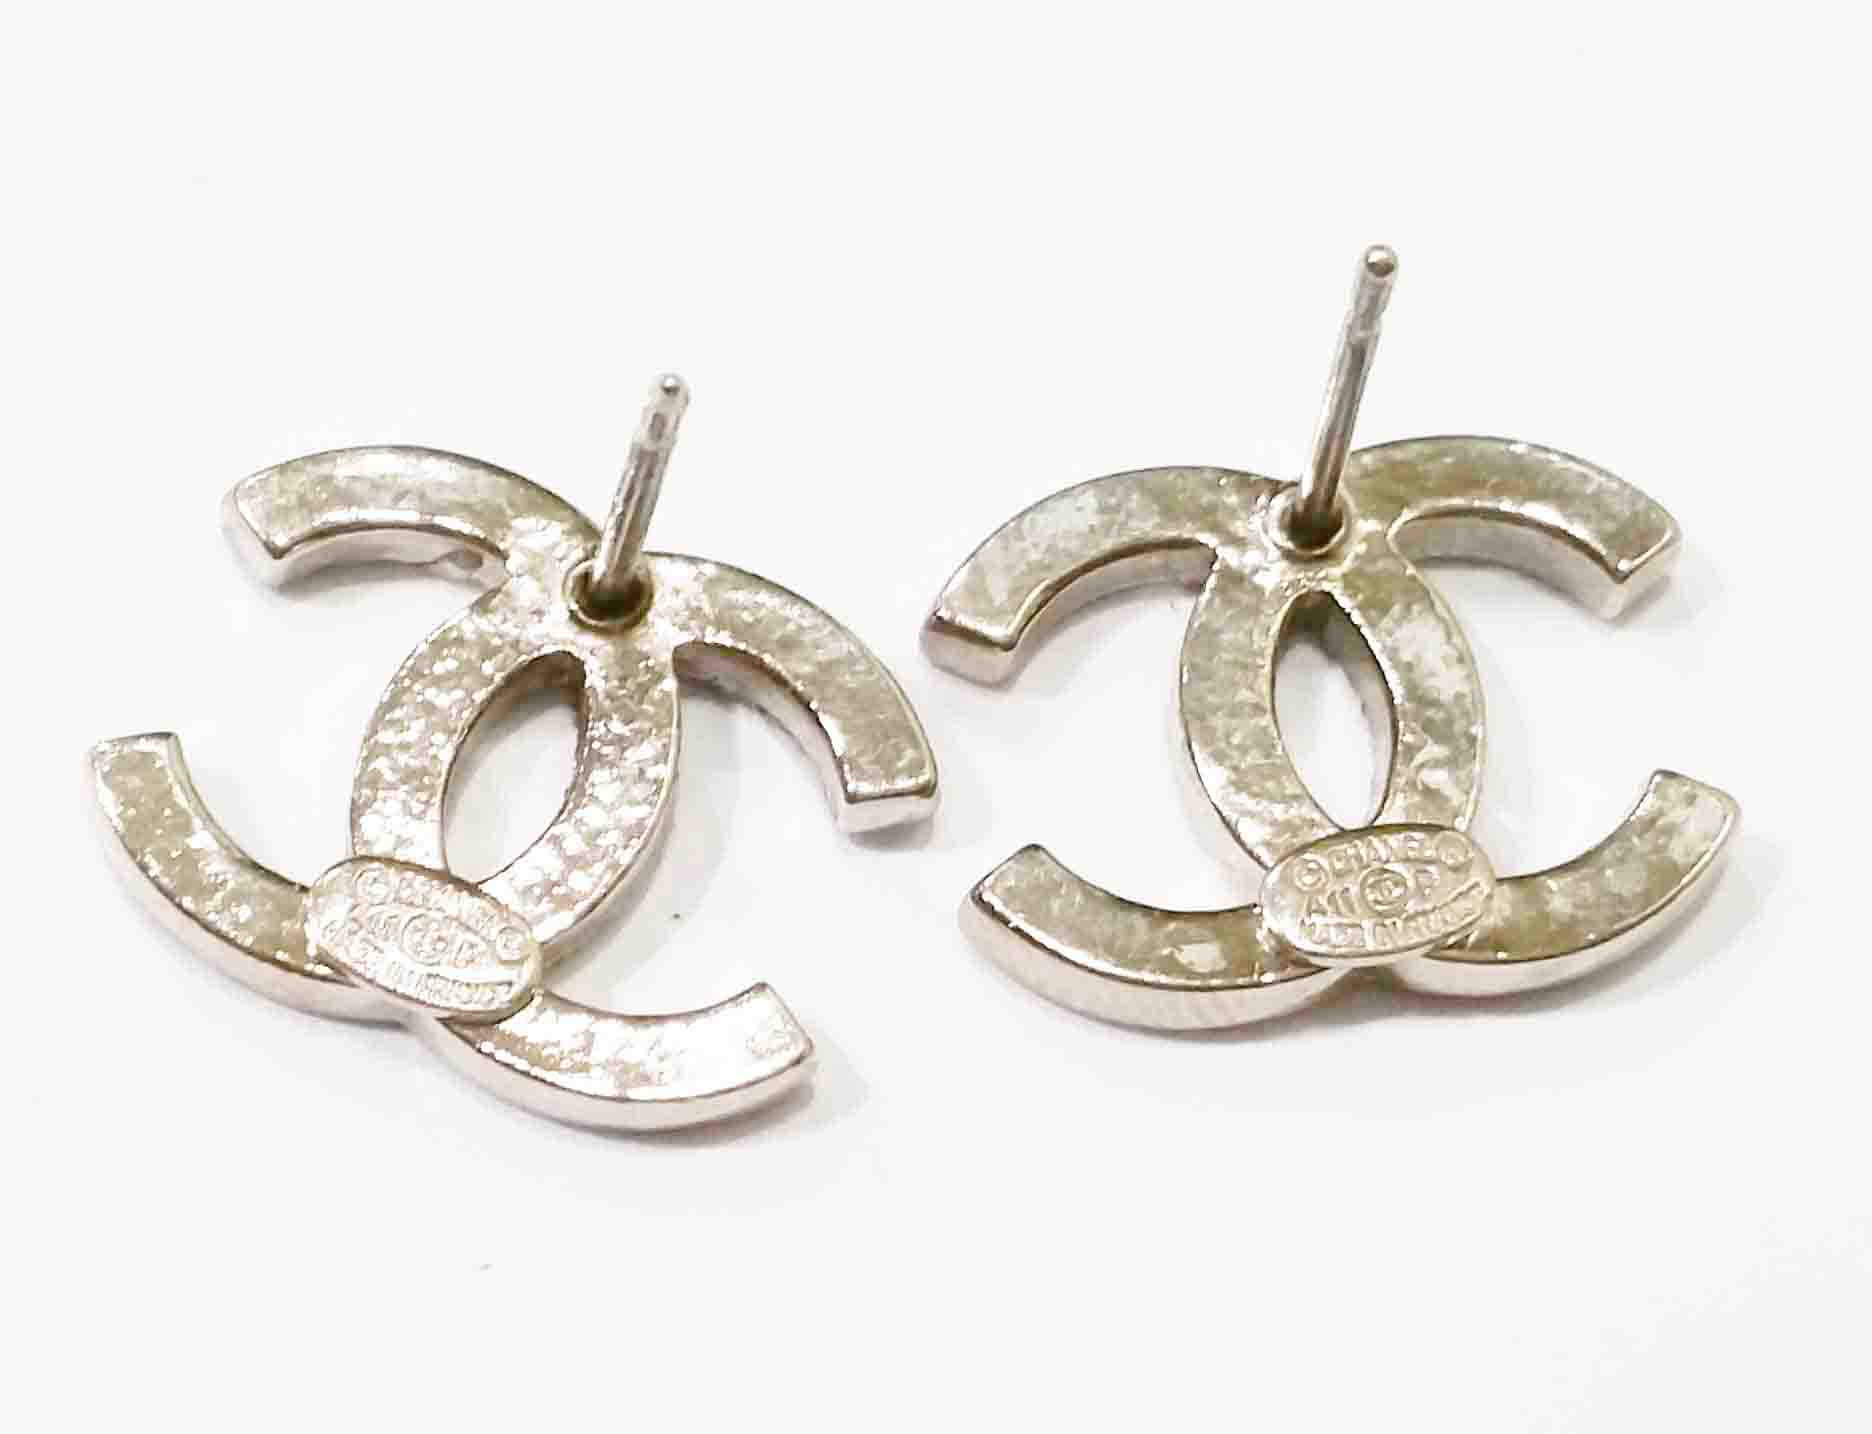 Chanel Earrings Cc
 Chanel Earrings Authentic Chanel Classic Silver Cc